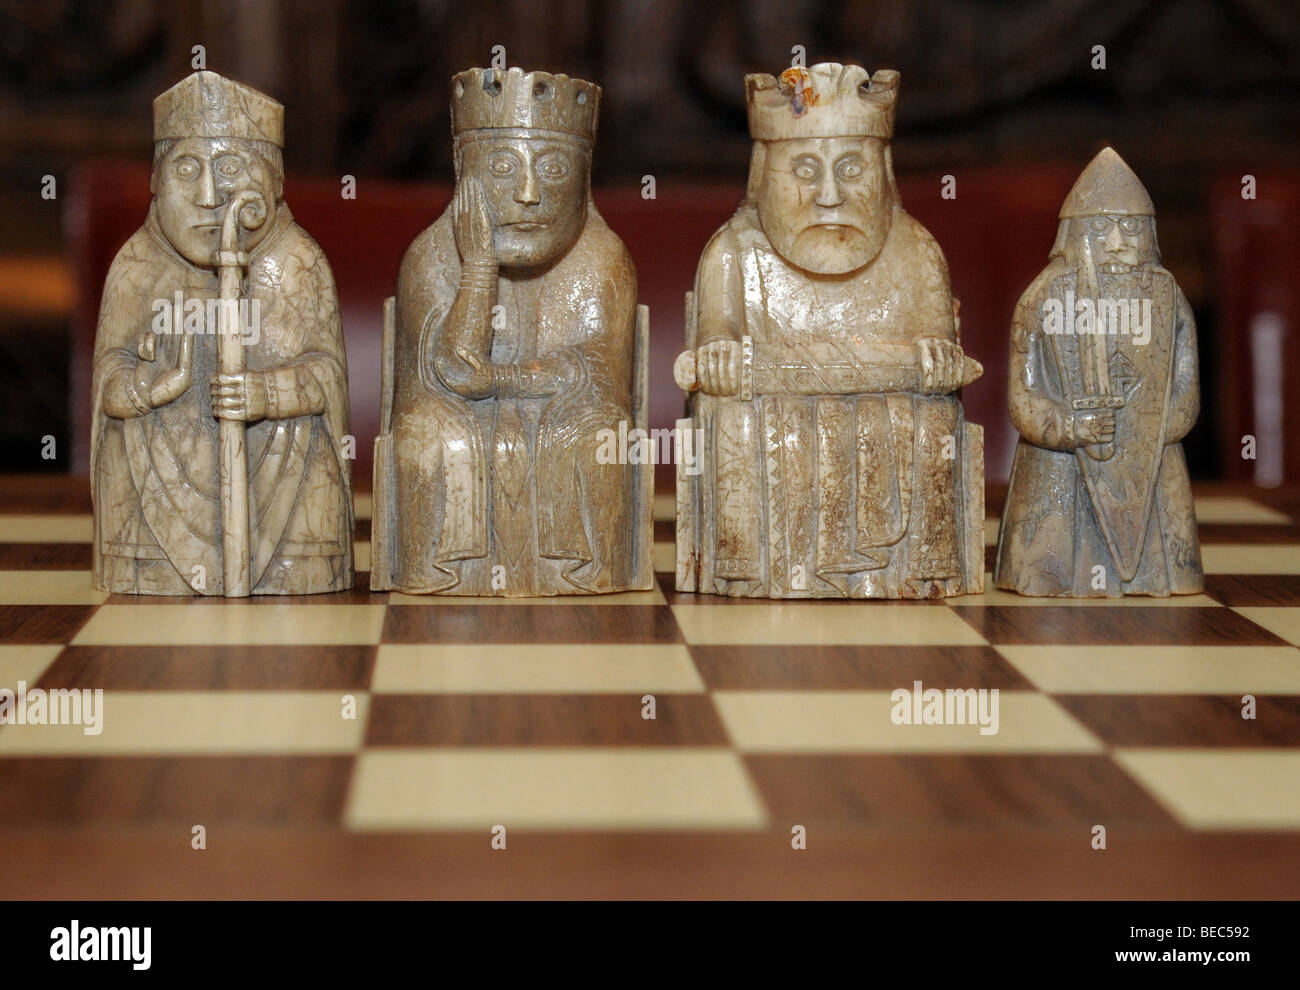 Some of the original Lewis chess men held in the national museum of Scotland. Stock Photo